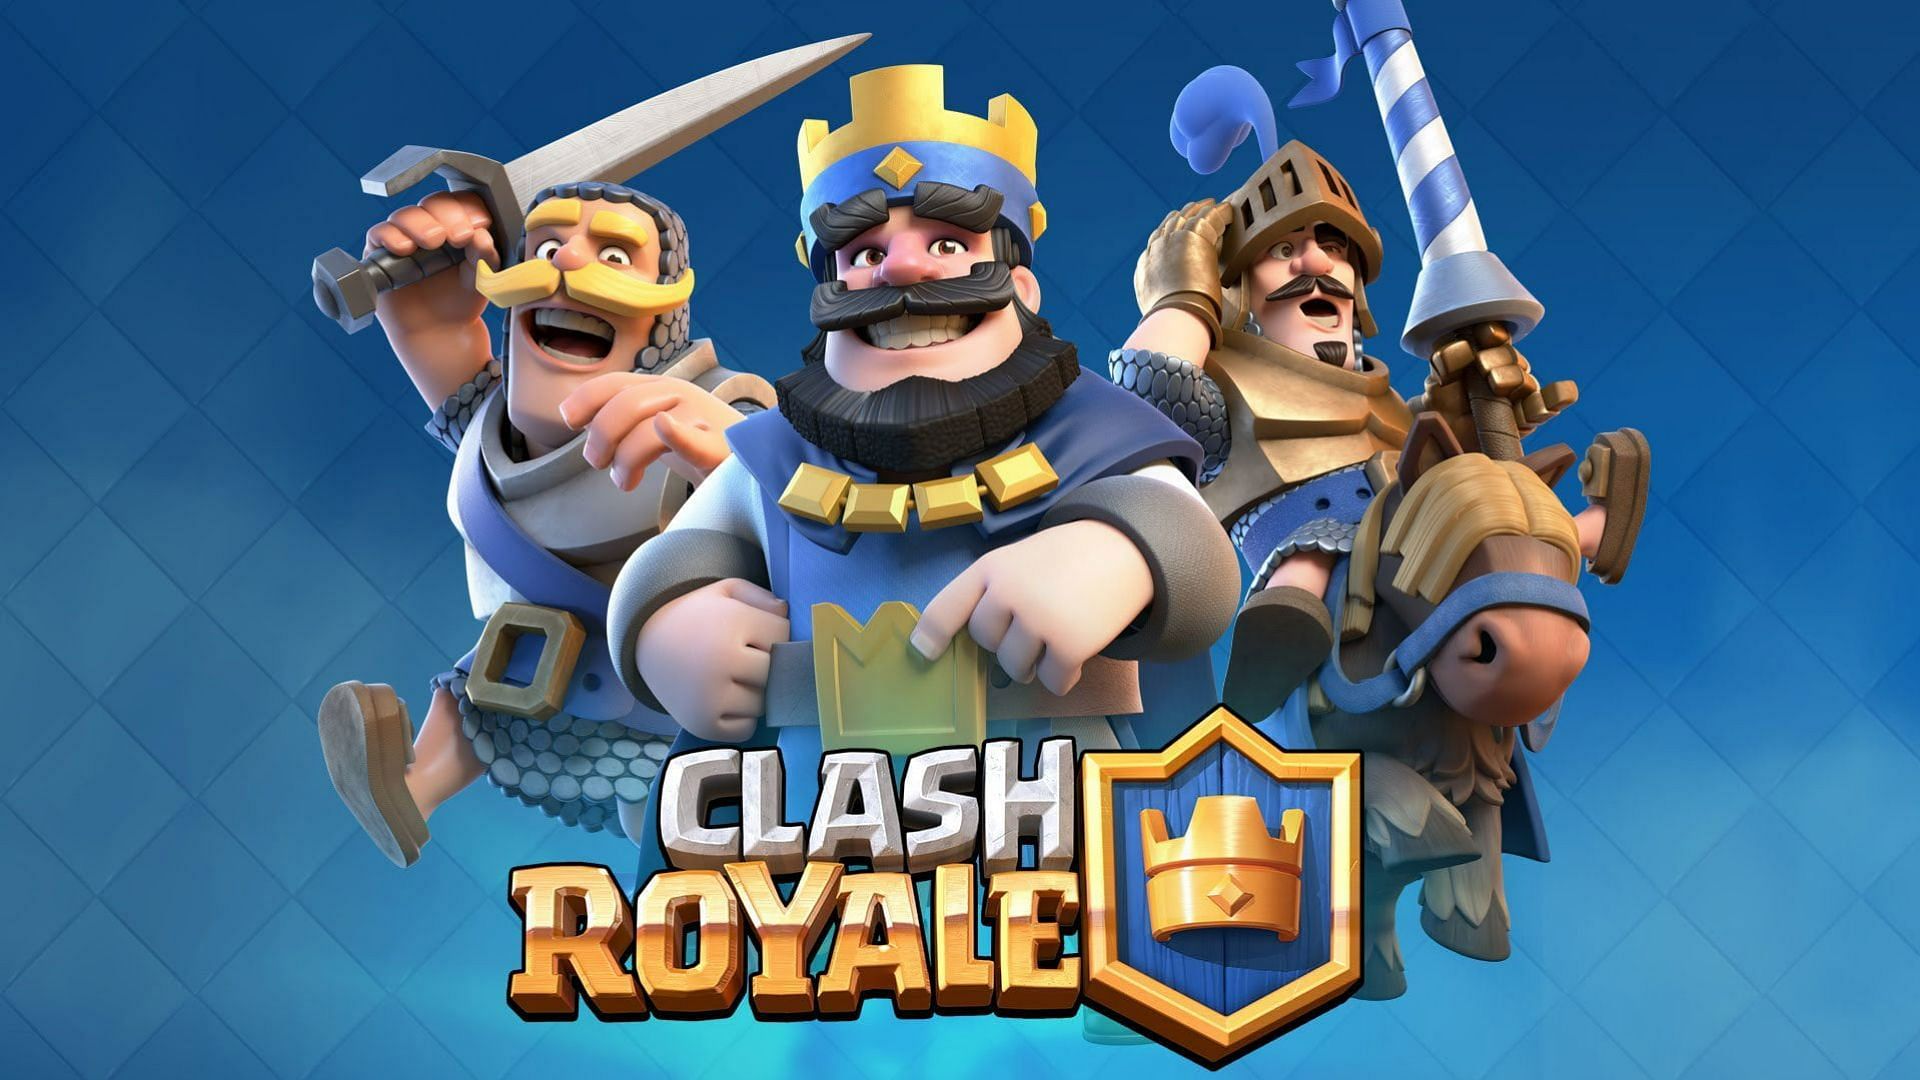 Tips and tricks to build a balanced deck in Clash Royale